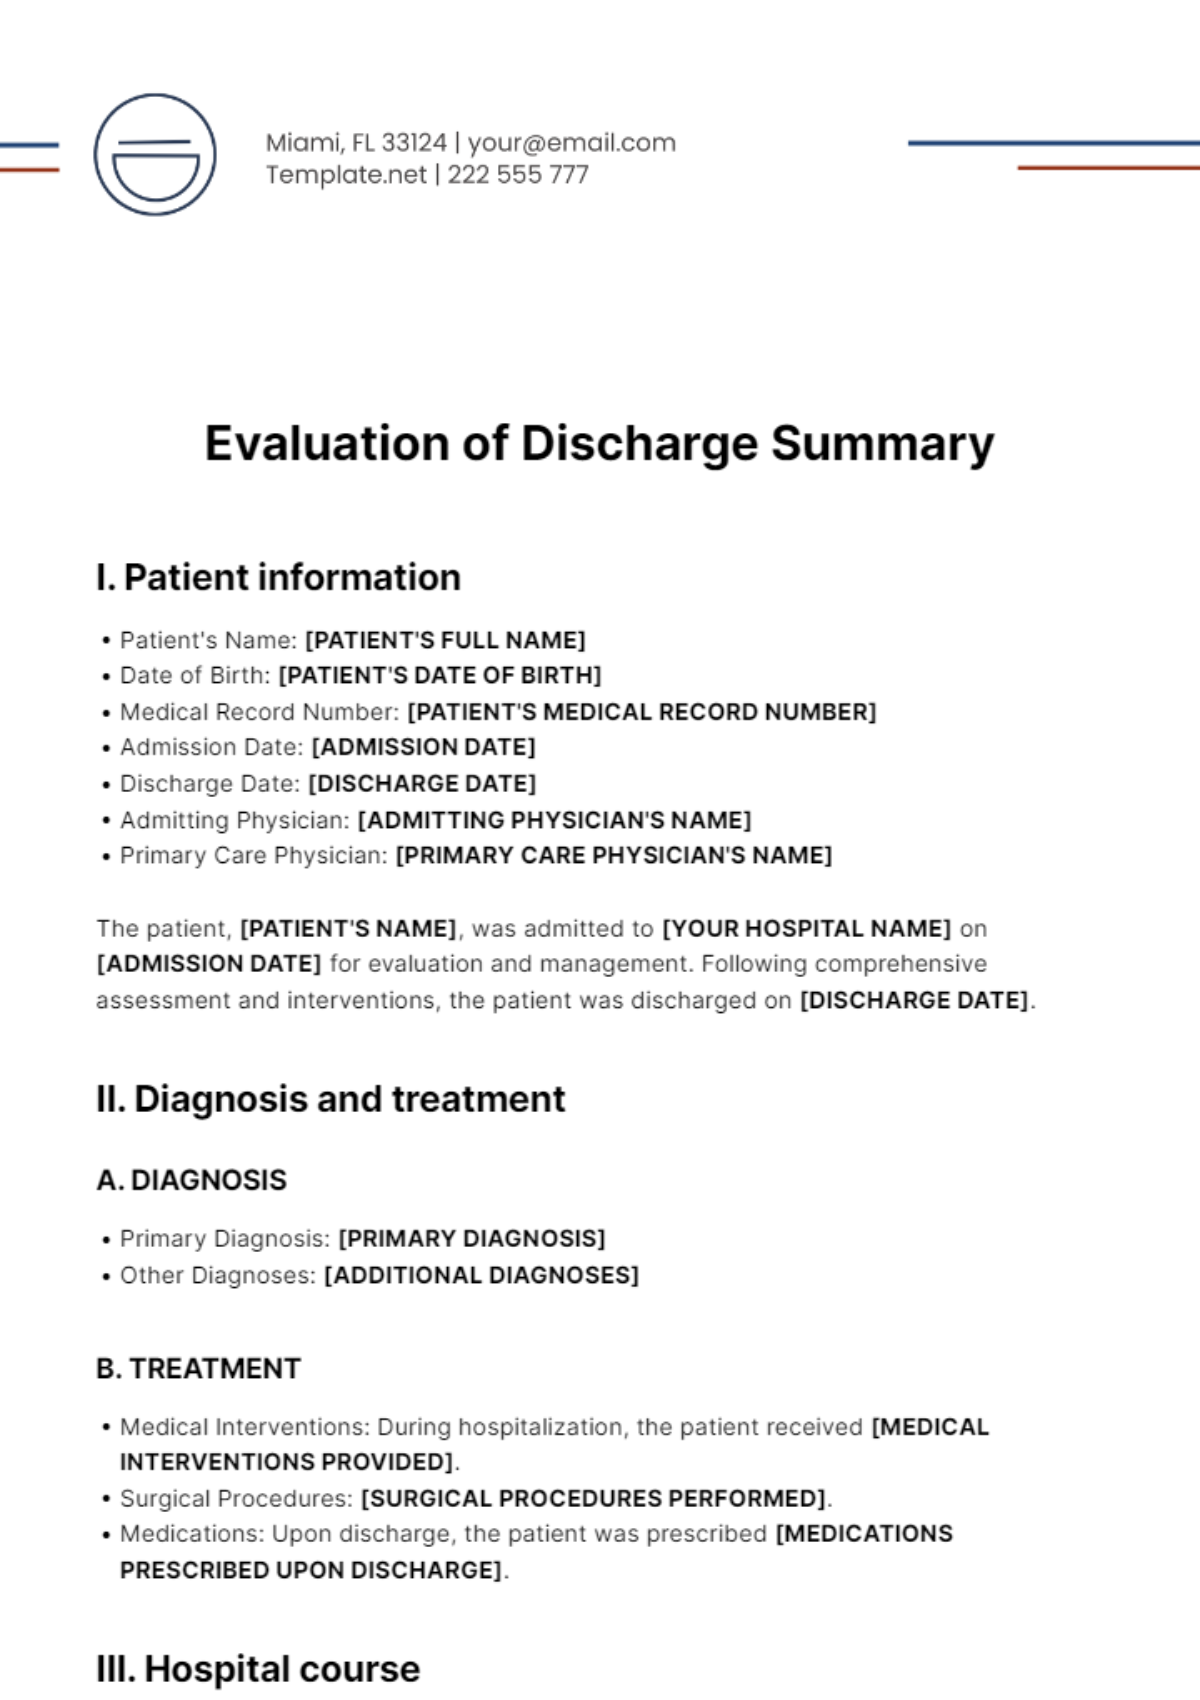 Free Evaluation of Discharge Summary Template